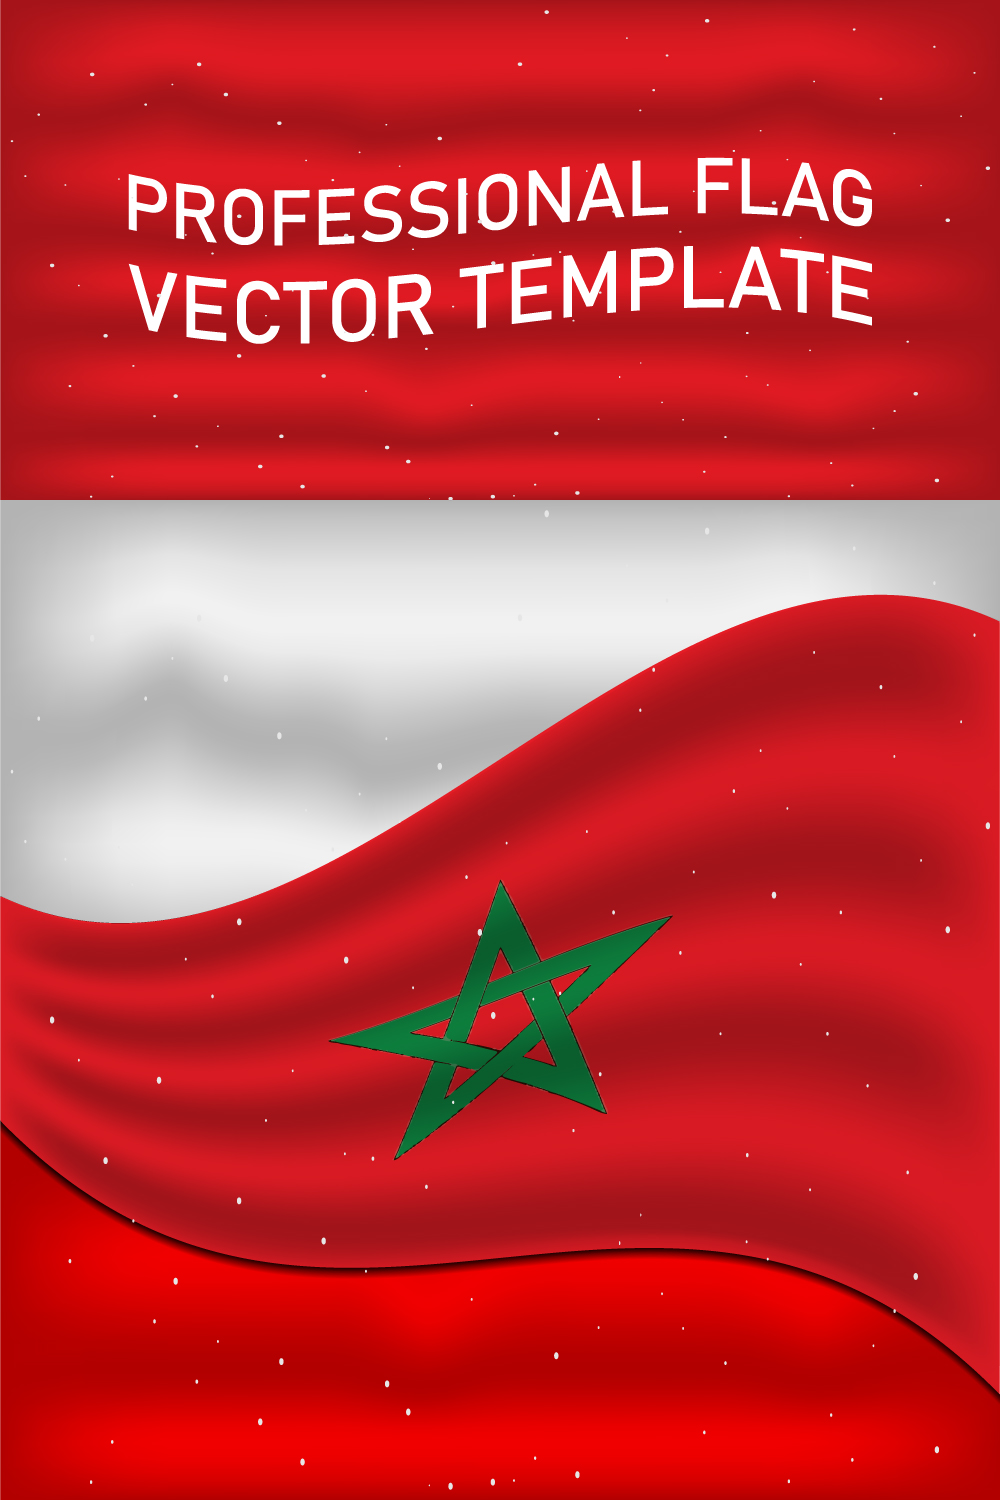 Irresistible image of the flag of Morocco.